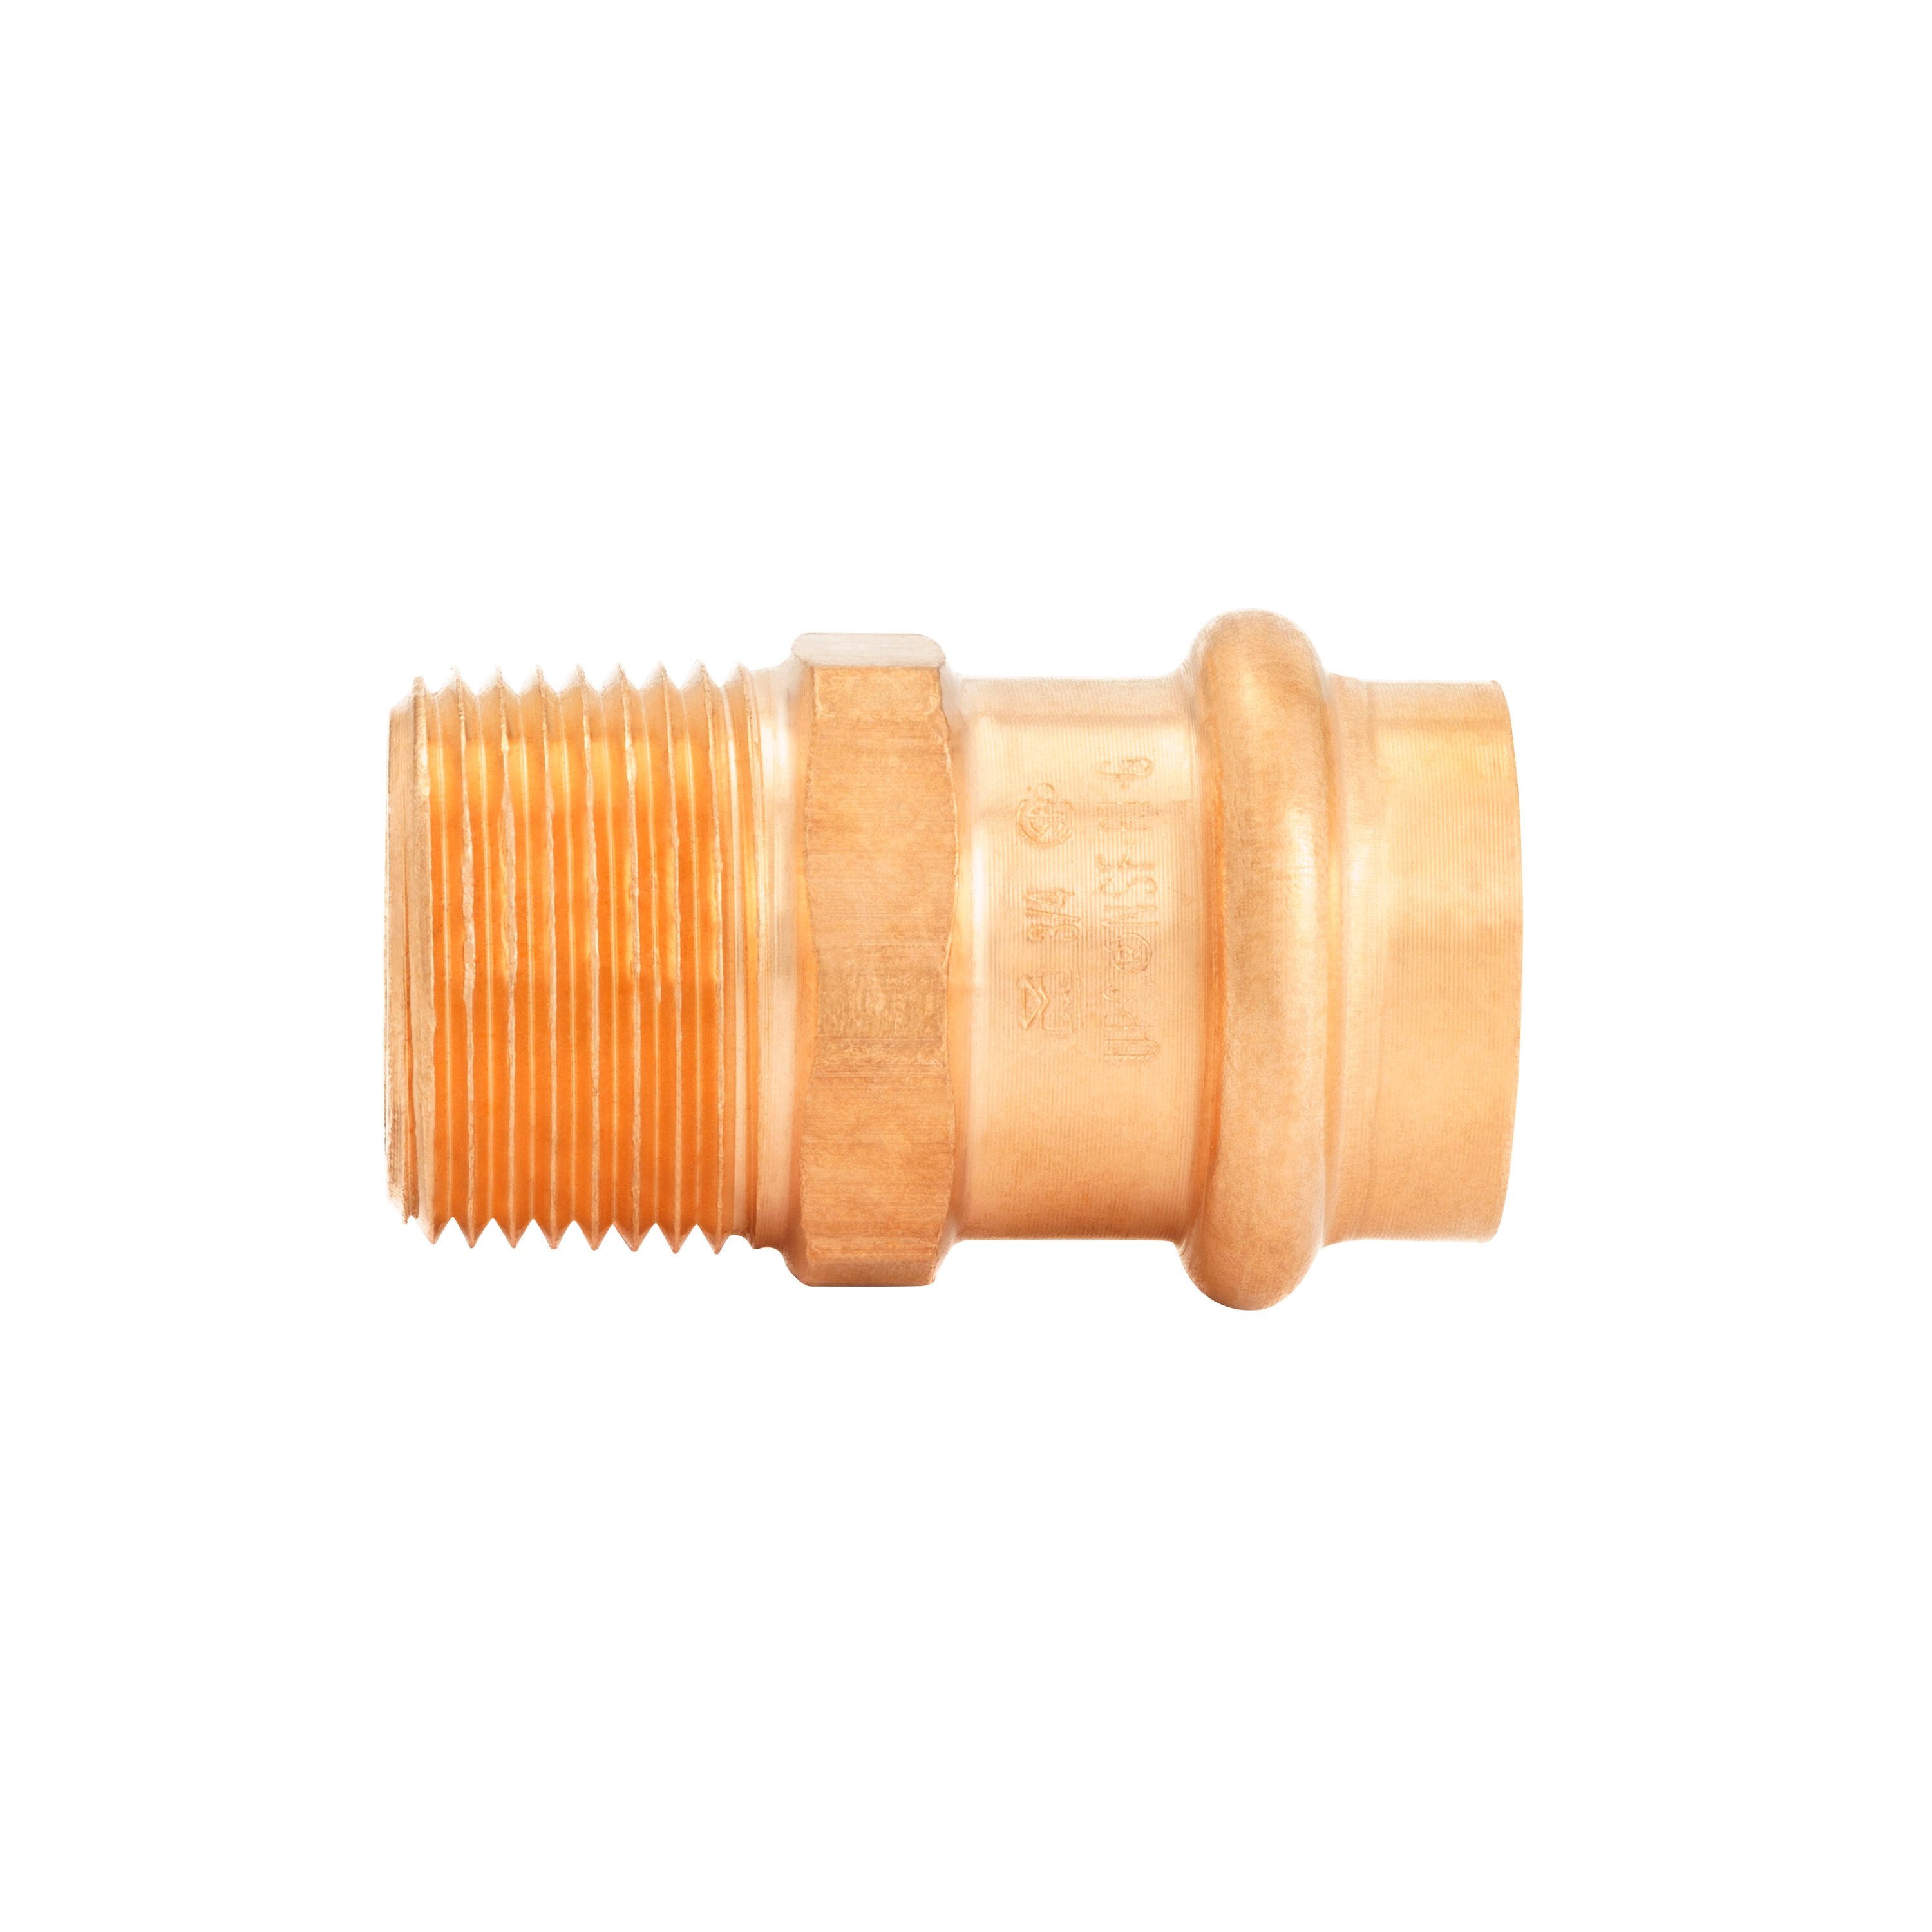 Air Conditioning Copper Pipe Fittings, Propress Refrigeration Copper  Fittings